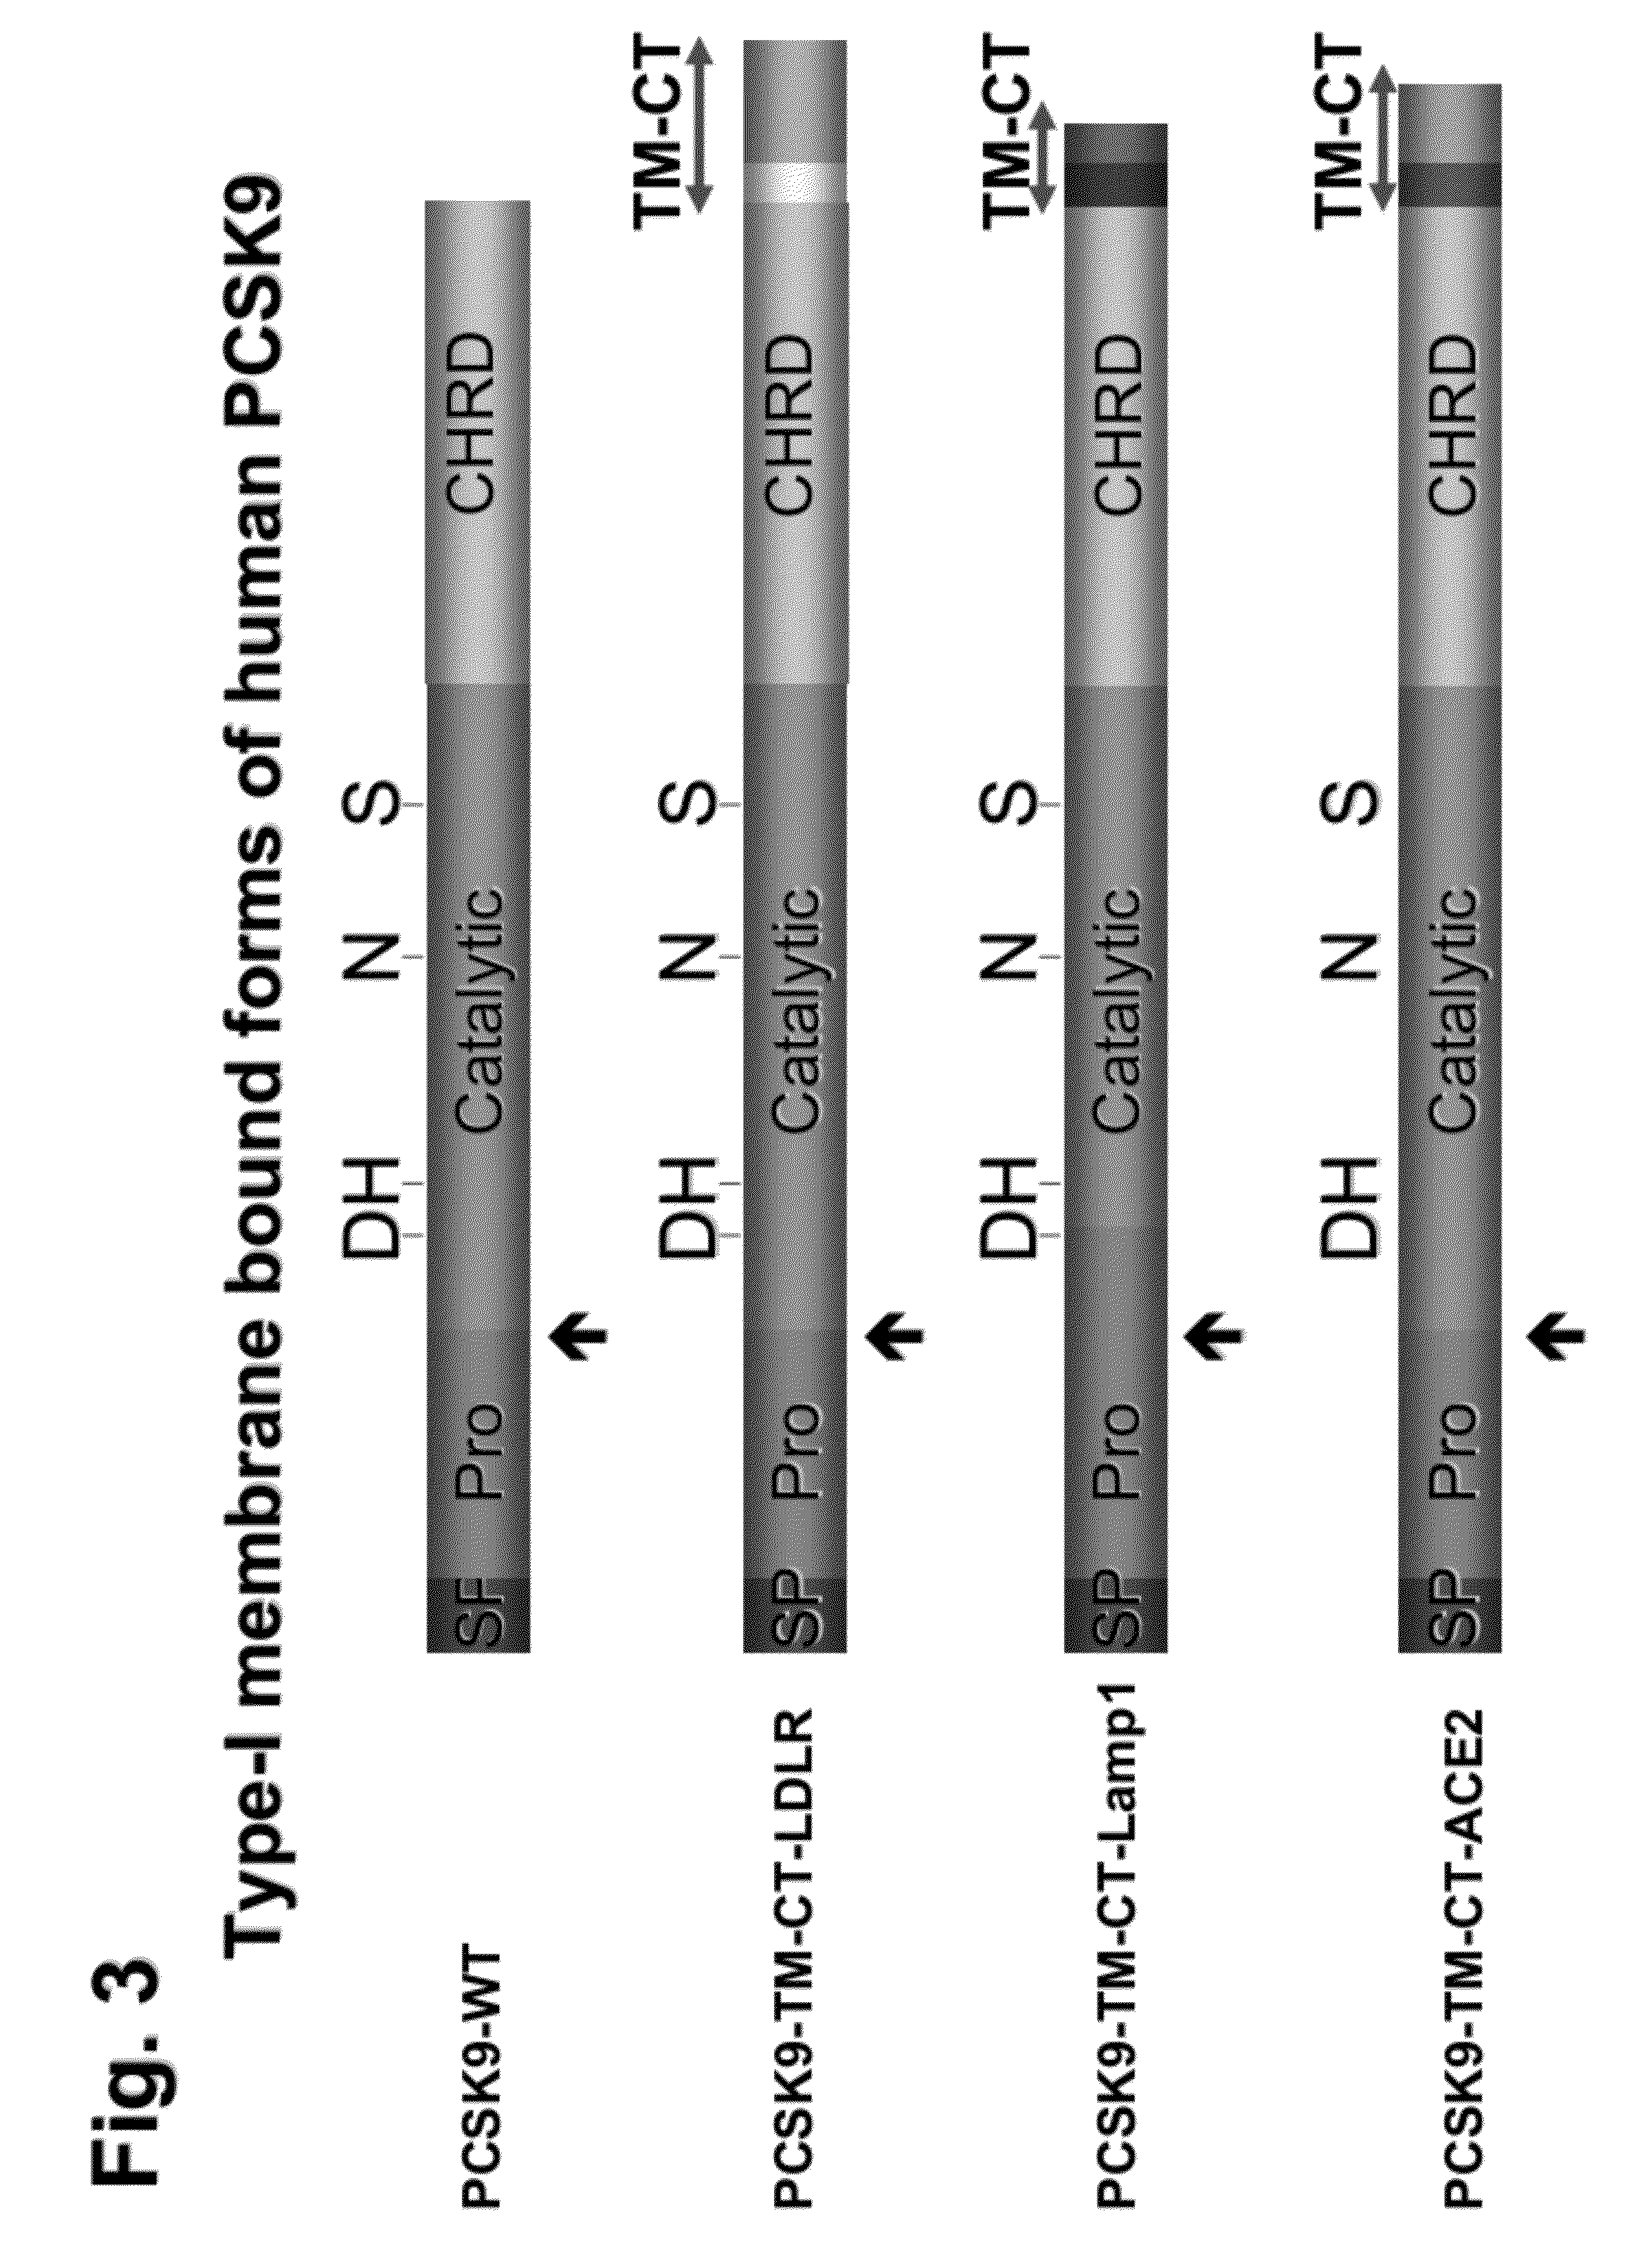 Chimeric pcsk9 proteins, cells comprising same, and assays using same